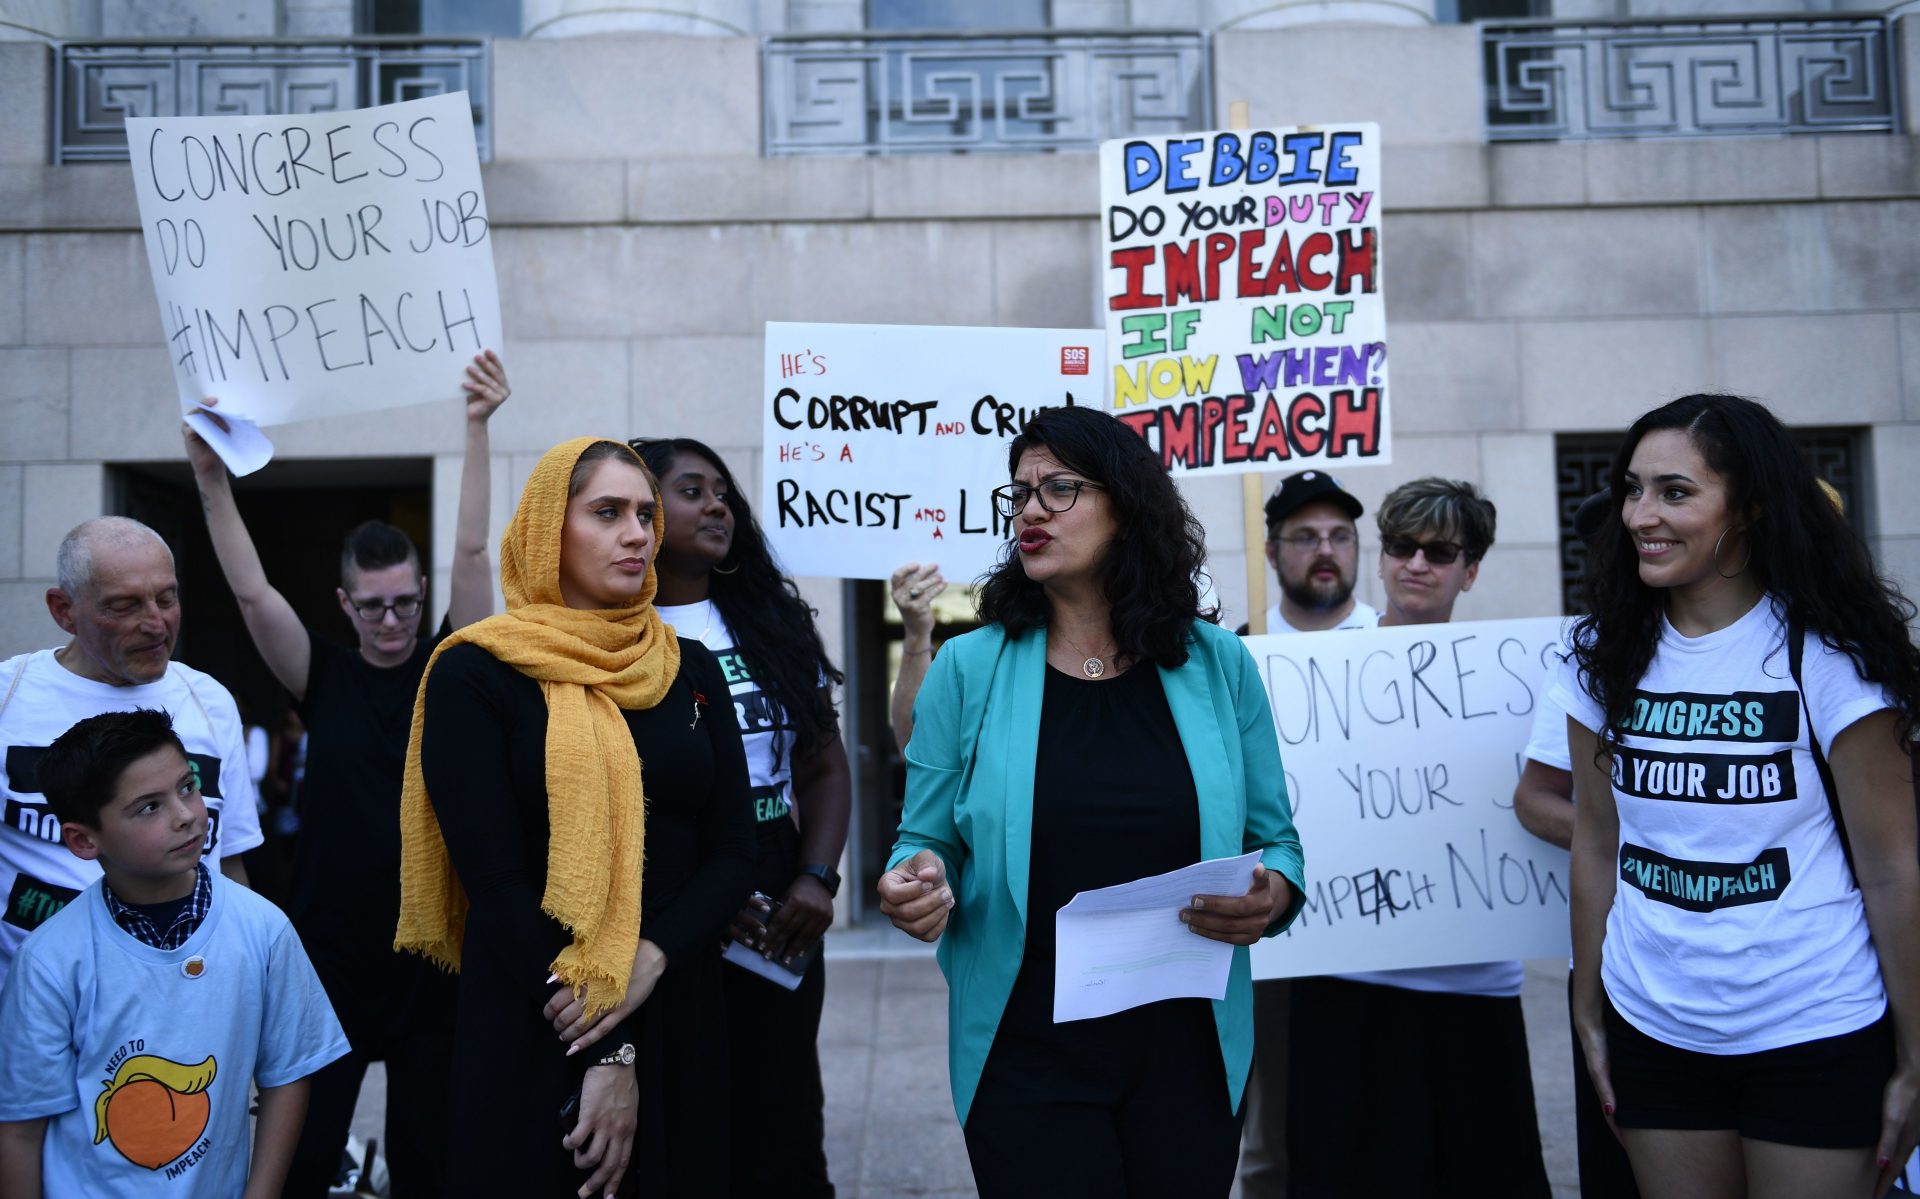 Rep. Rashida Tlaib, D-Mich., joins activists asking for impeachment of President Trump on Capitol Hill on Monday.